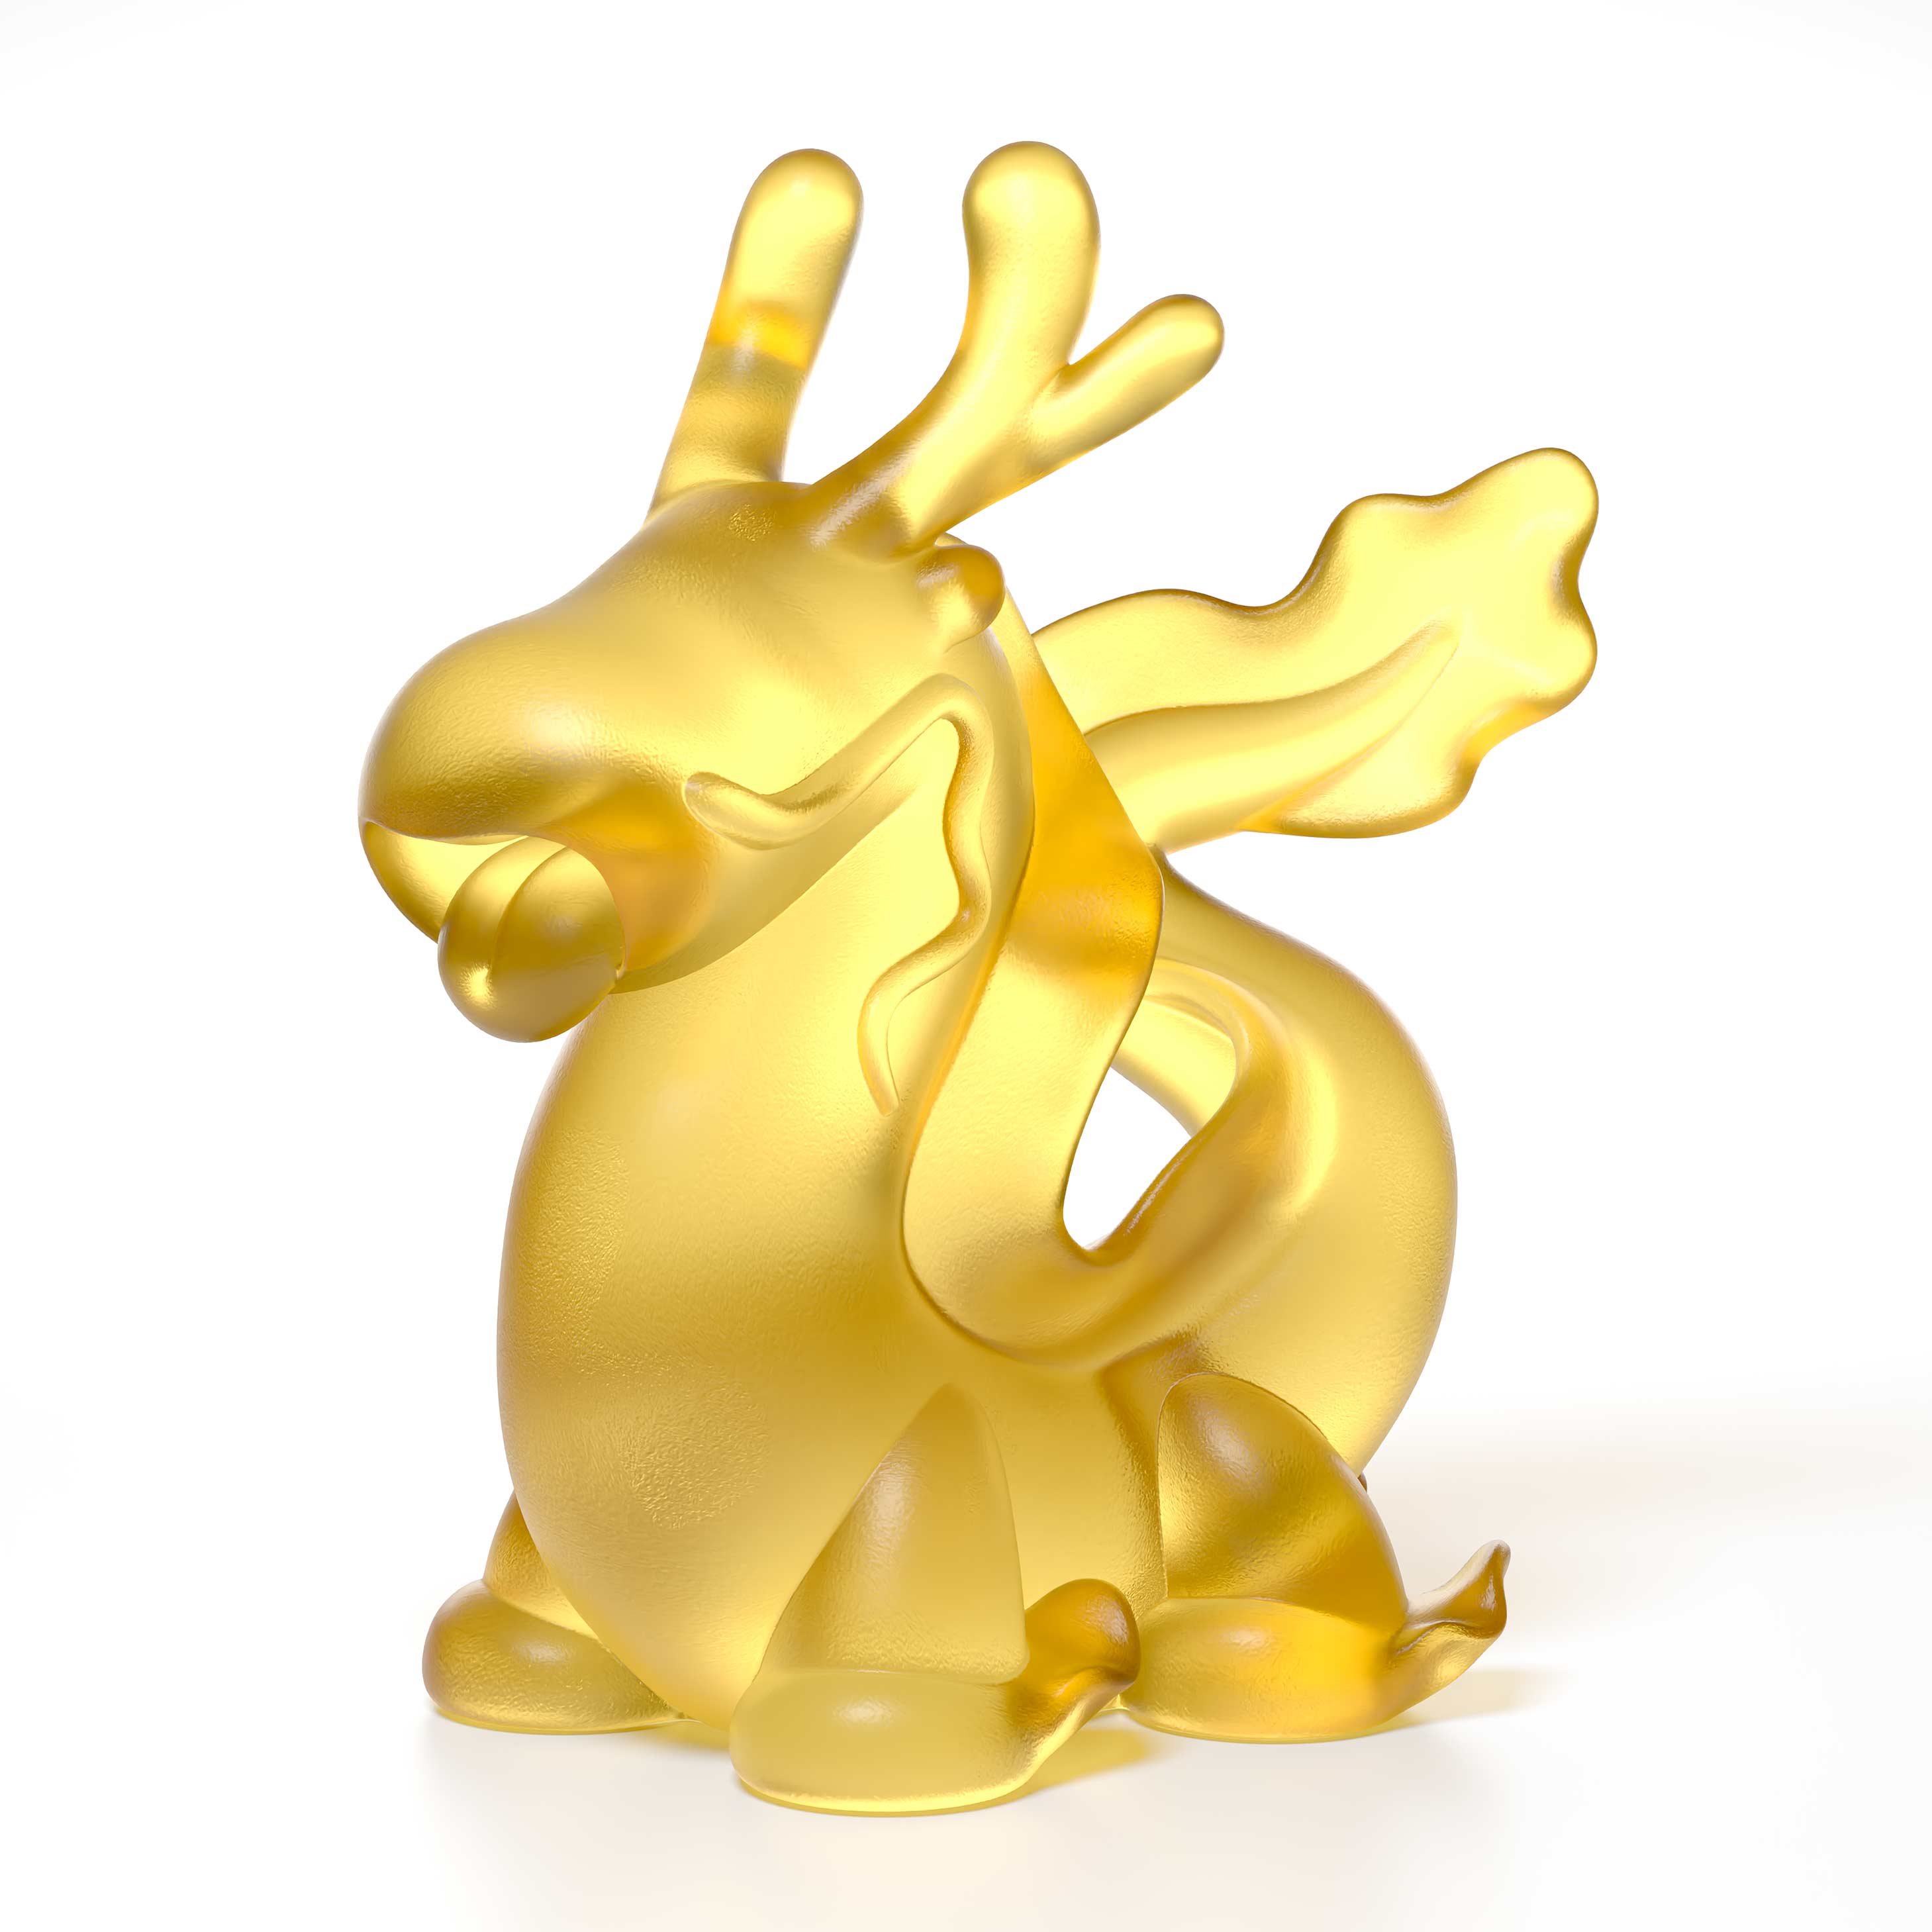 Dragon's Breath yellow crystal sculpture the size is  16 cm height,  by Ferdi B Dick, Limited edition of 50 hero view